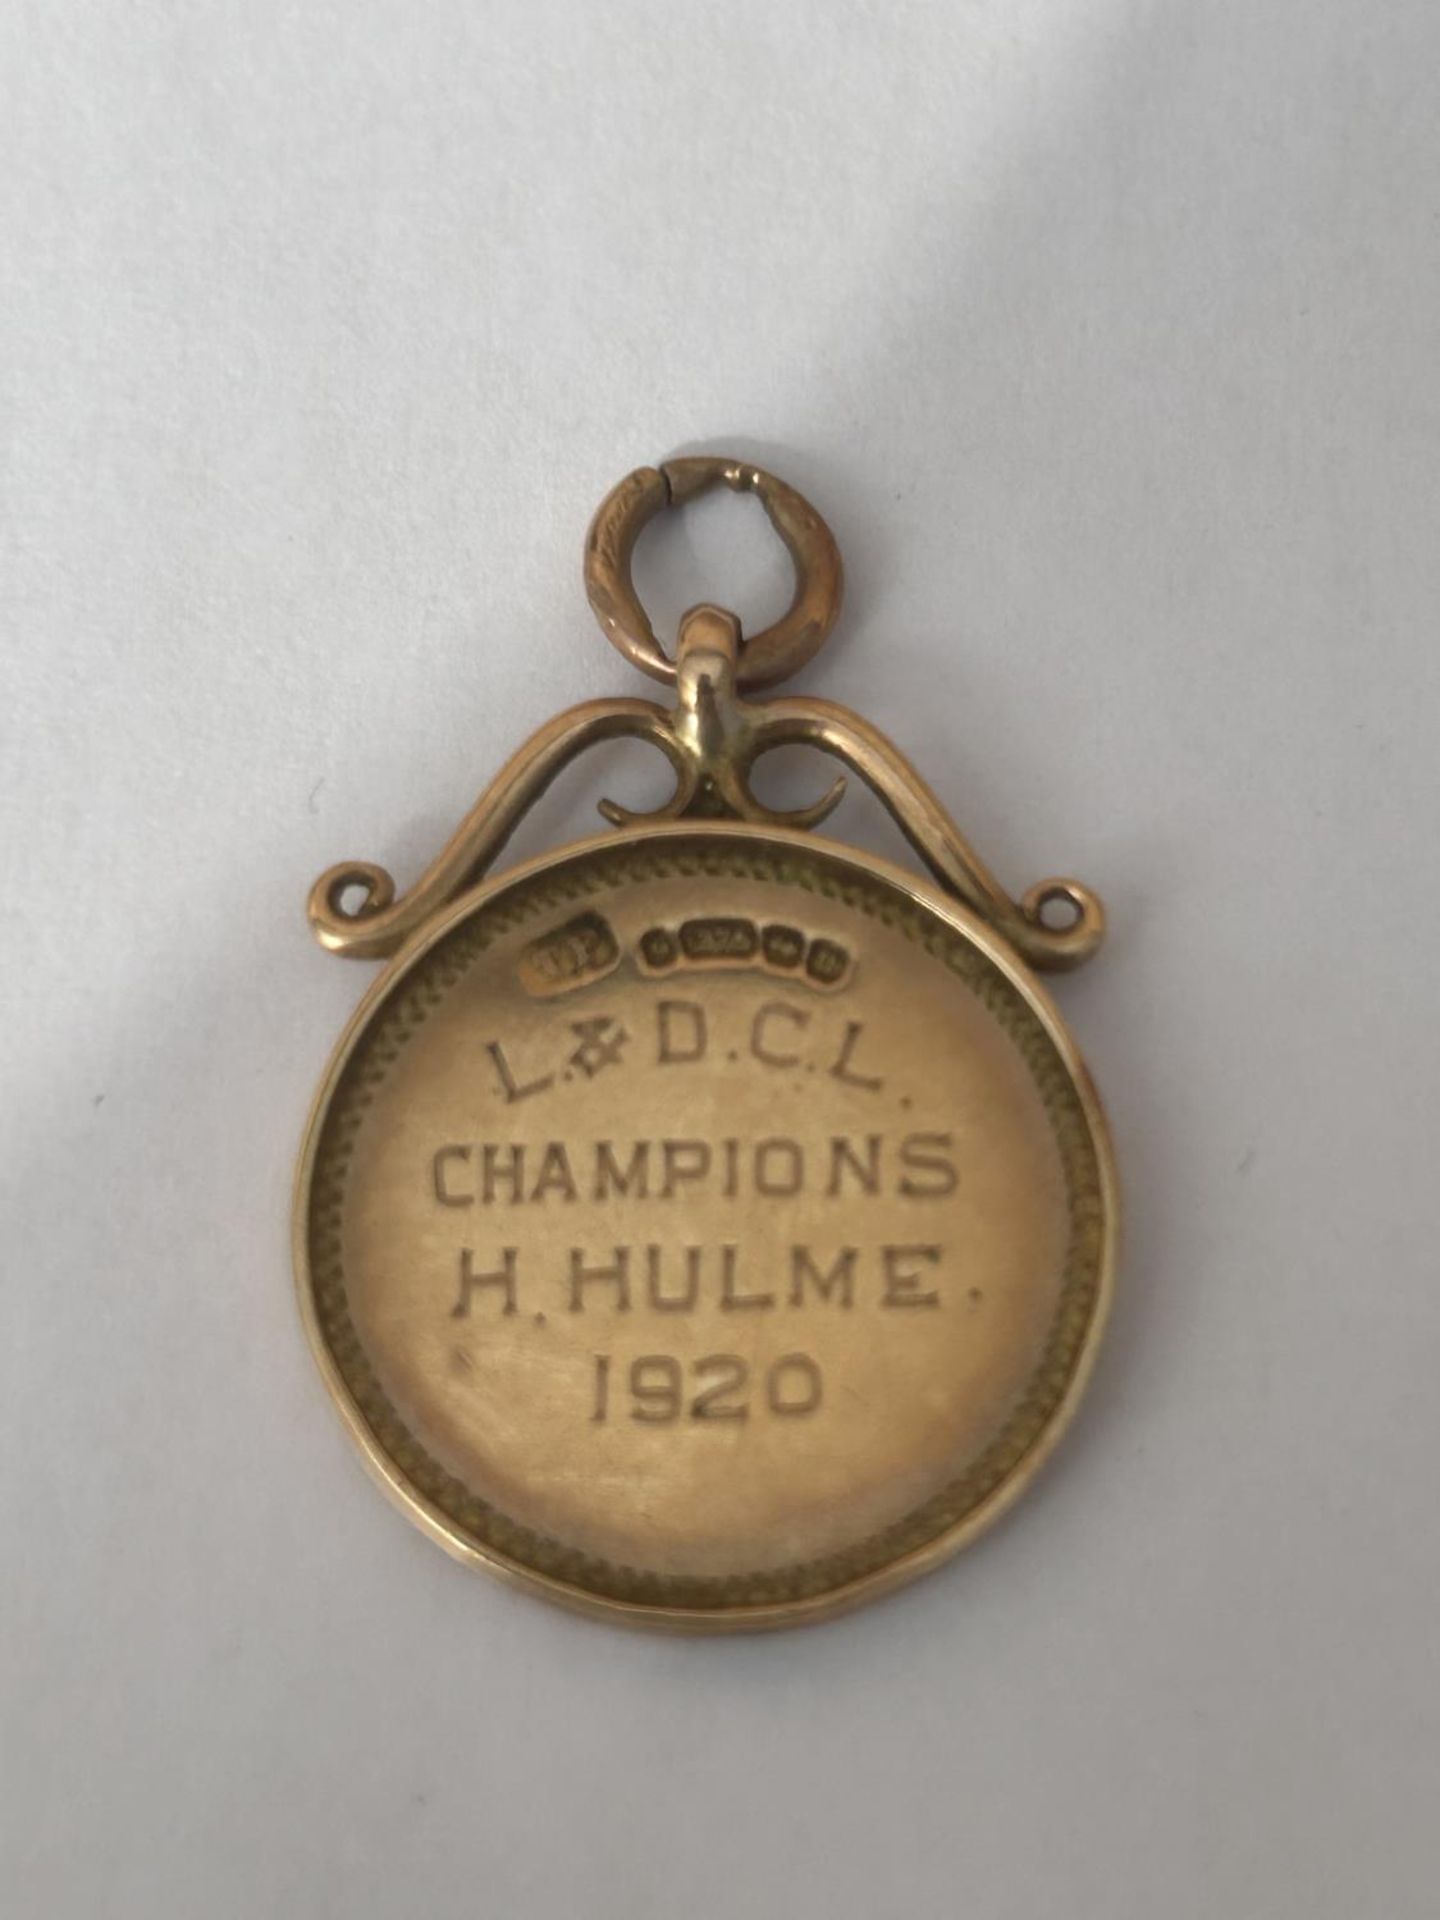 A HALLMARKED 9CT GOLD BIRMINGHAM SPORTING FOB INSCRIBED "L & D.C.L CHAMPIONS H.HULME 1920" MAKERS - Image 3 of 4